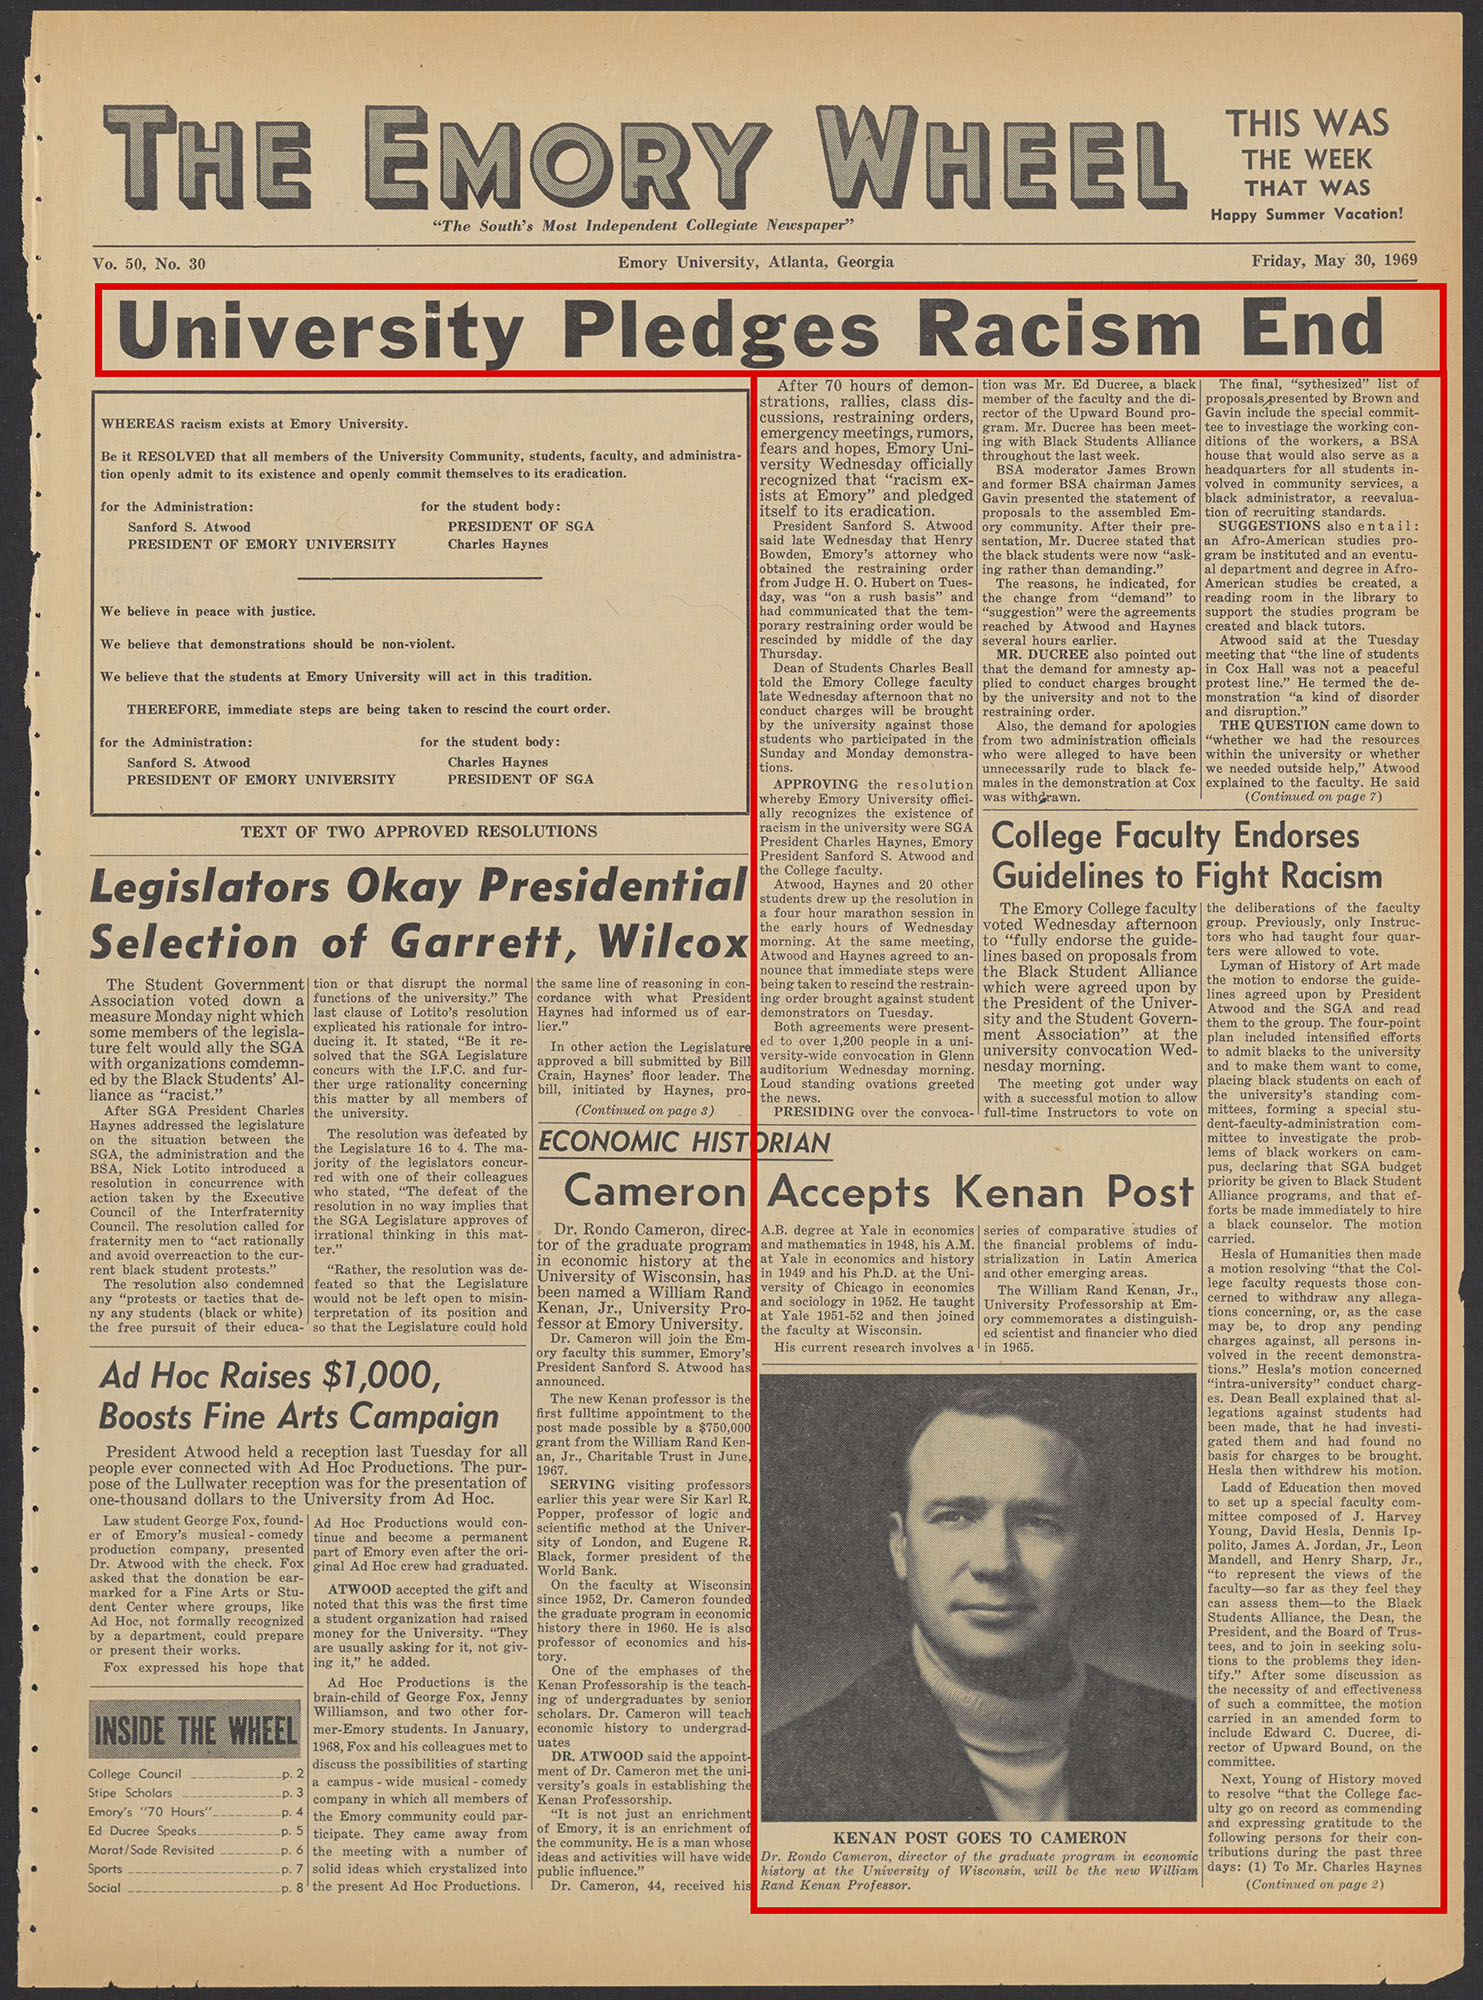 Emory Wheel newspaper front page with "University Pledges Racism End" headline